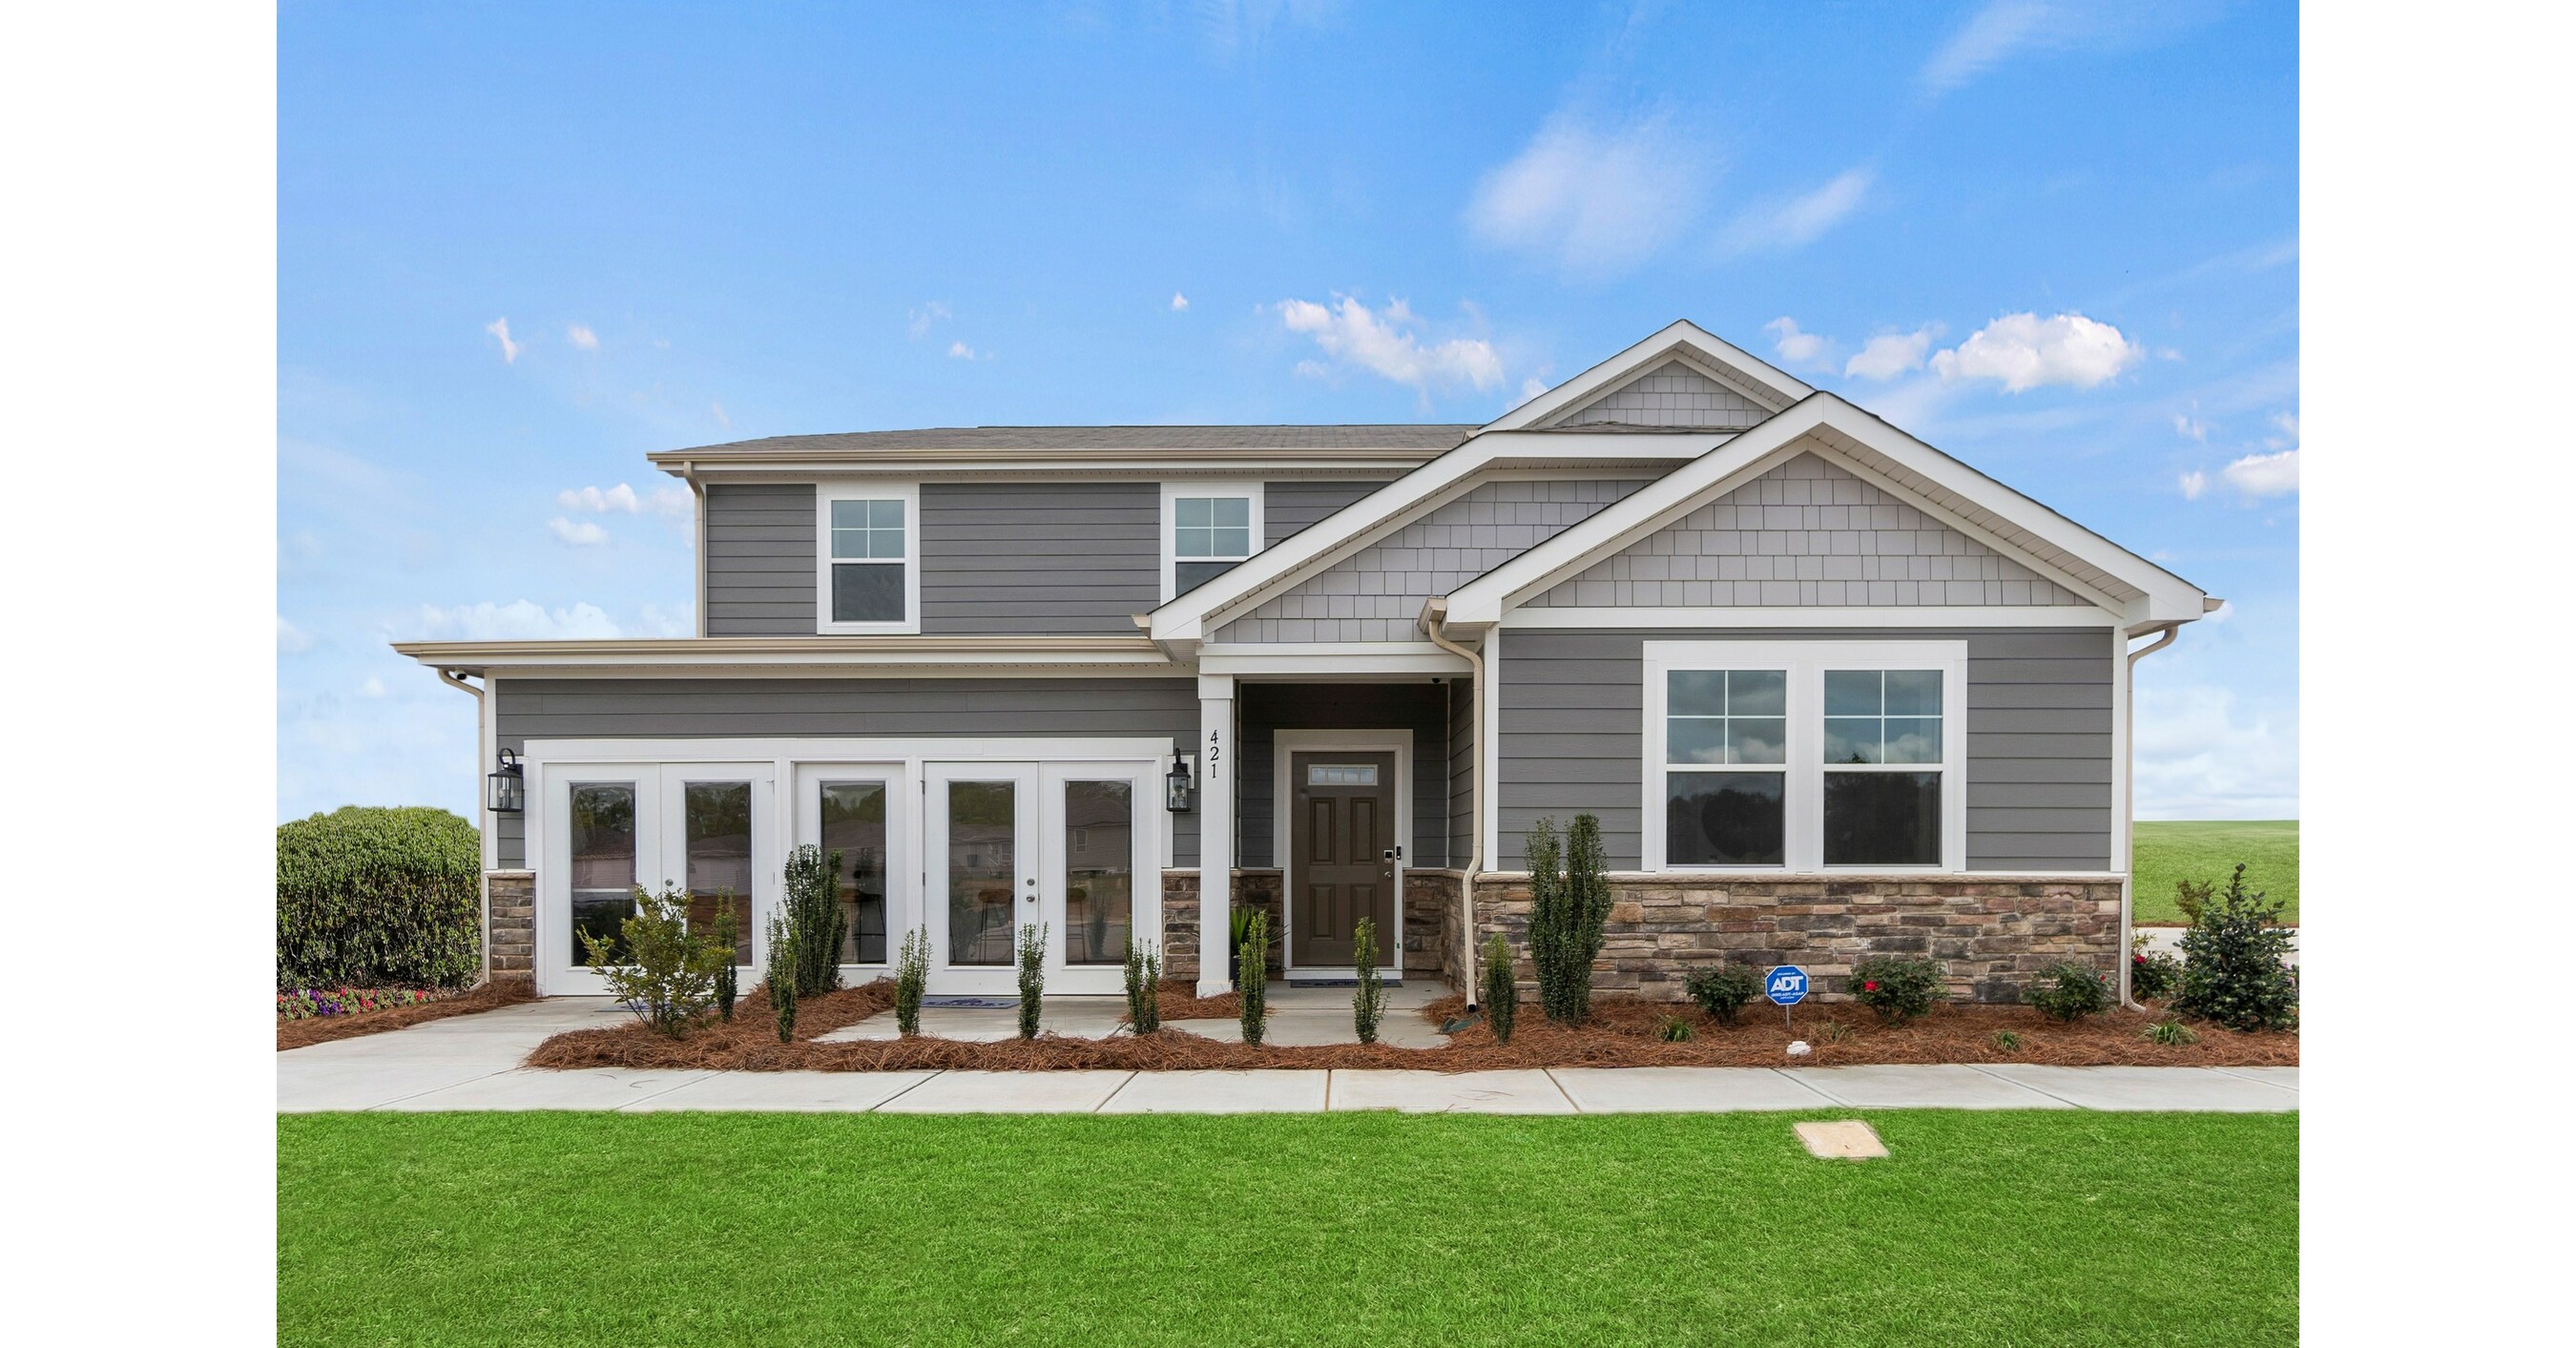  Century Communities Unveils Two New Model Homes in Monroe, NC 